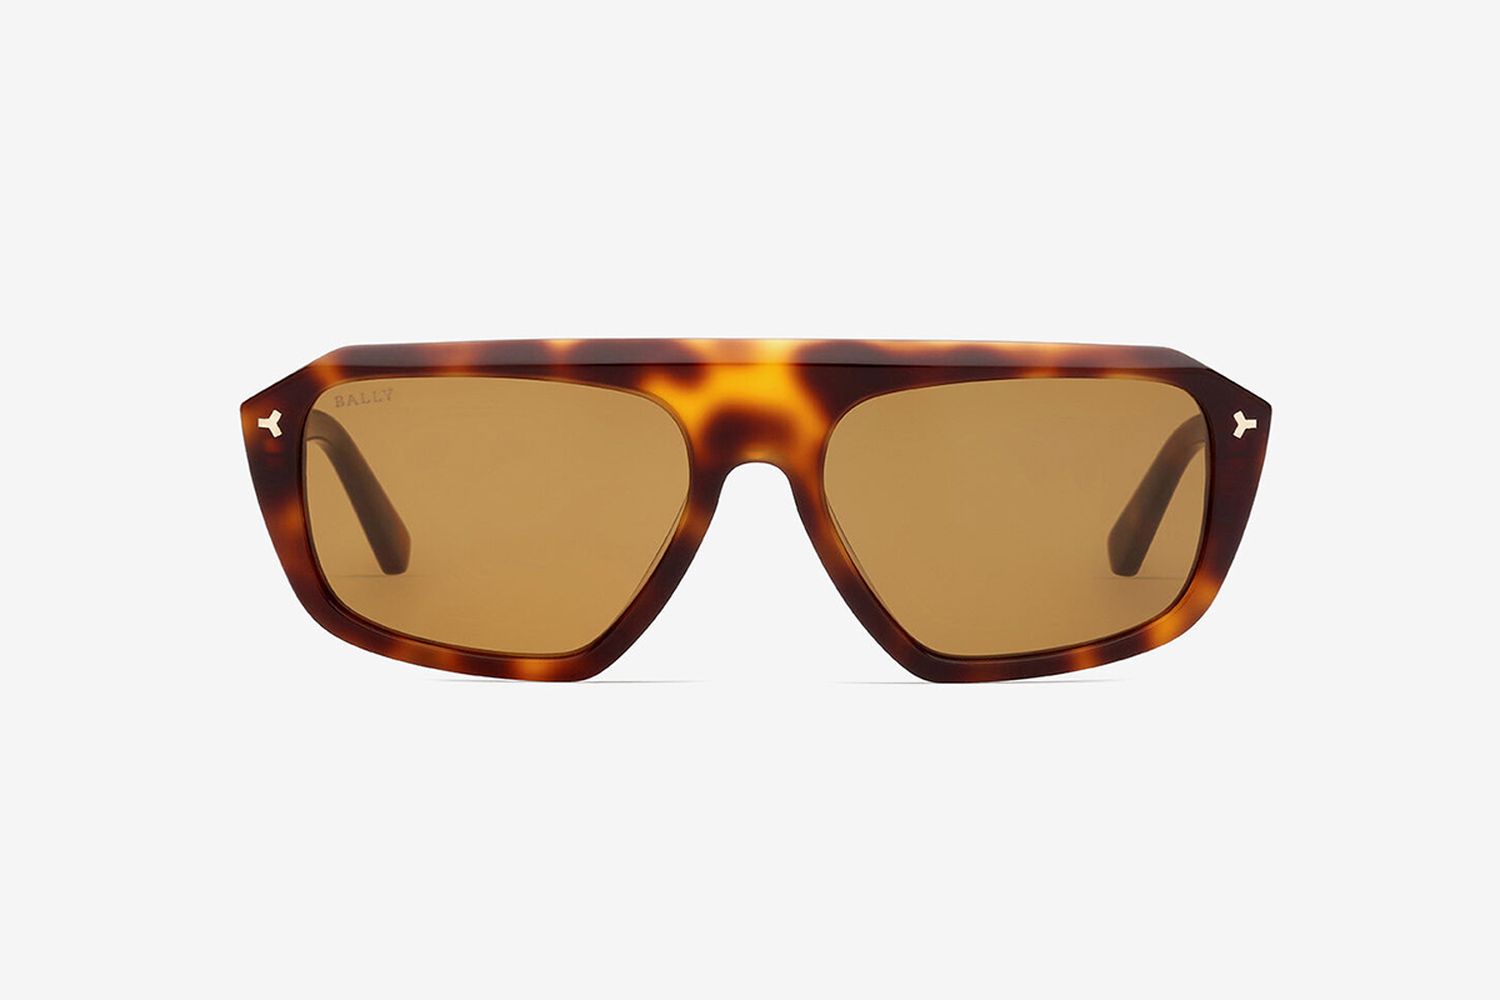 Universal Fit Acetate Sunglasses In Tortoise Shell